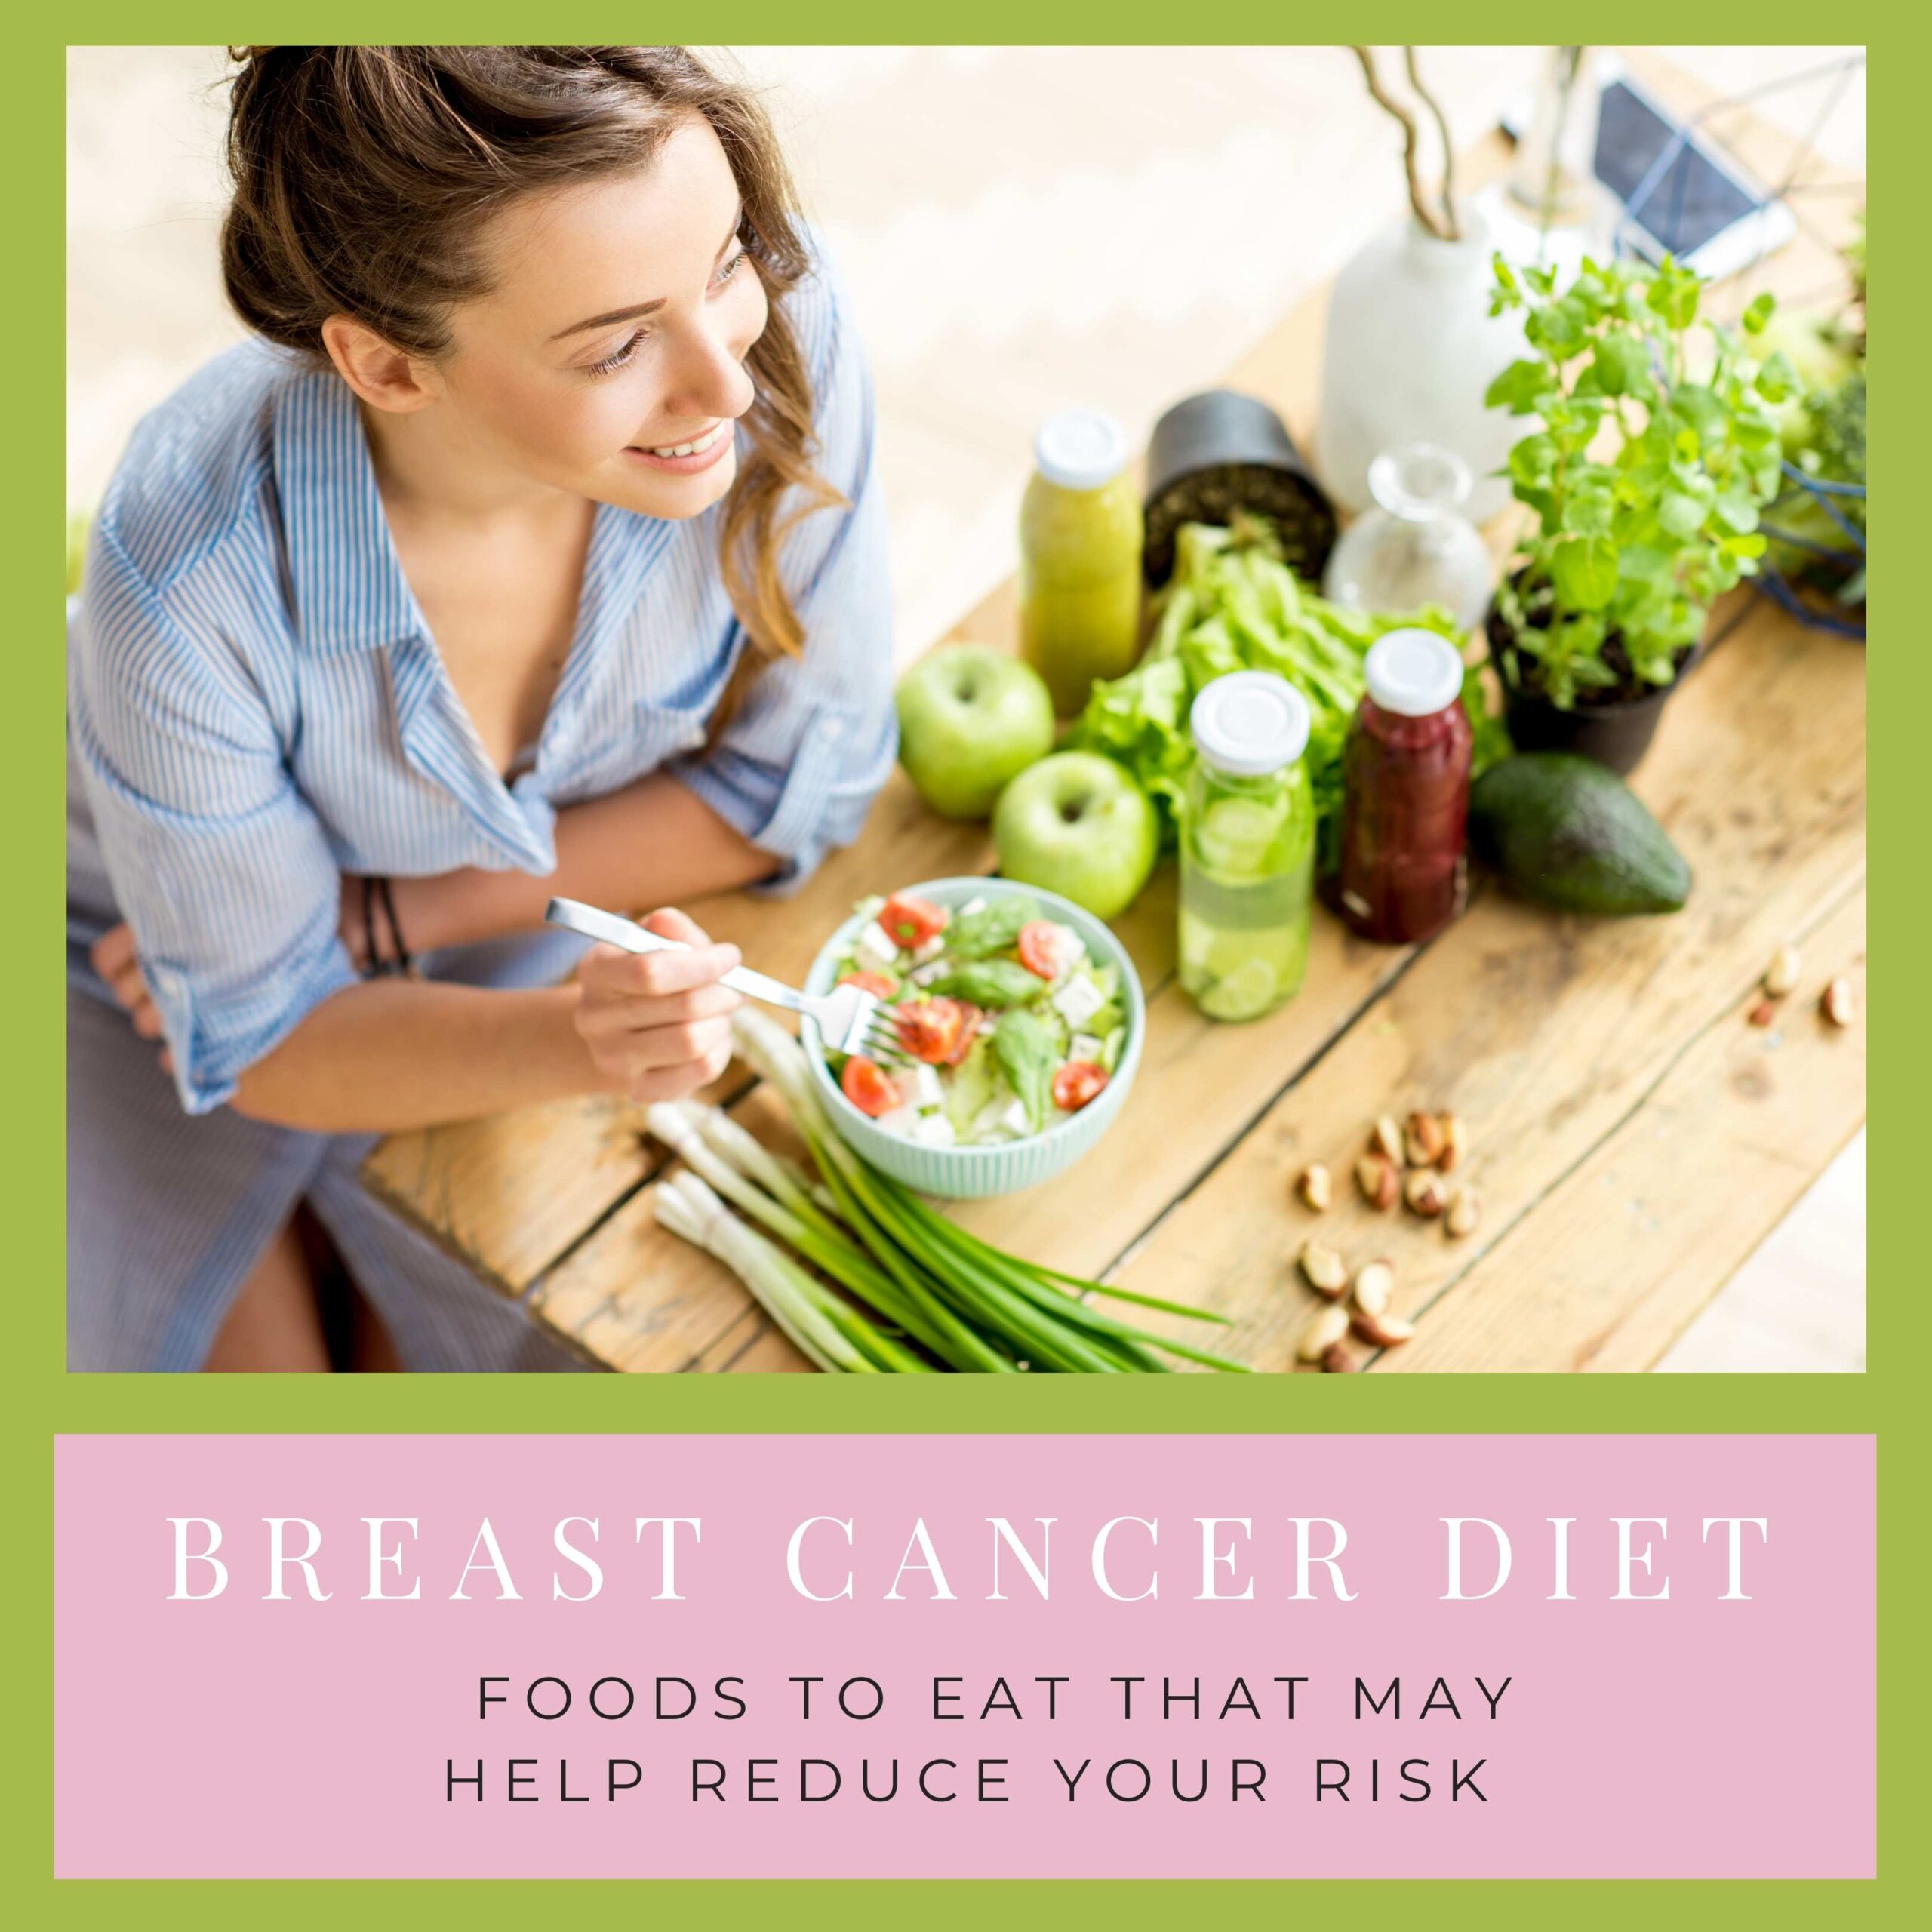 The Breast Cancer Diet